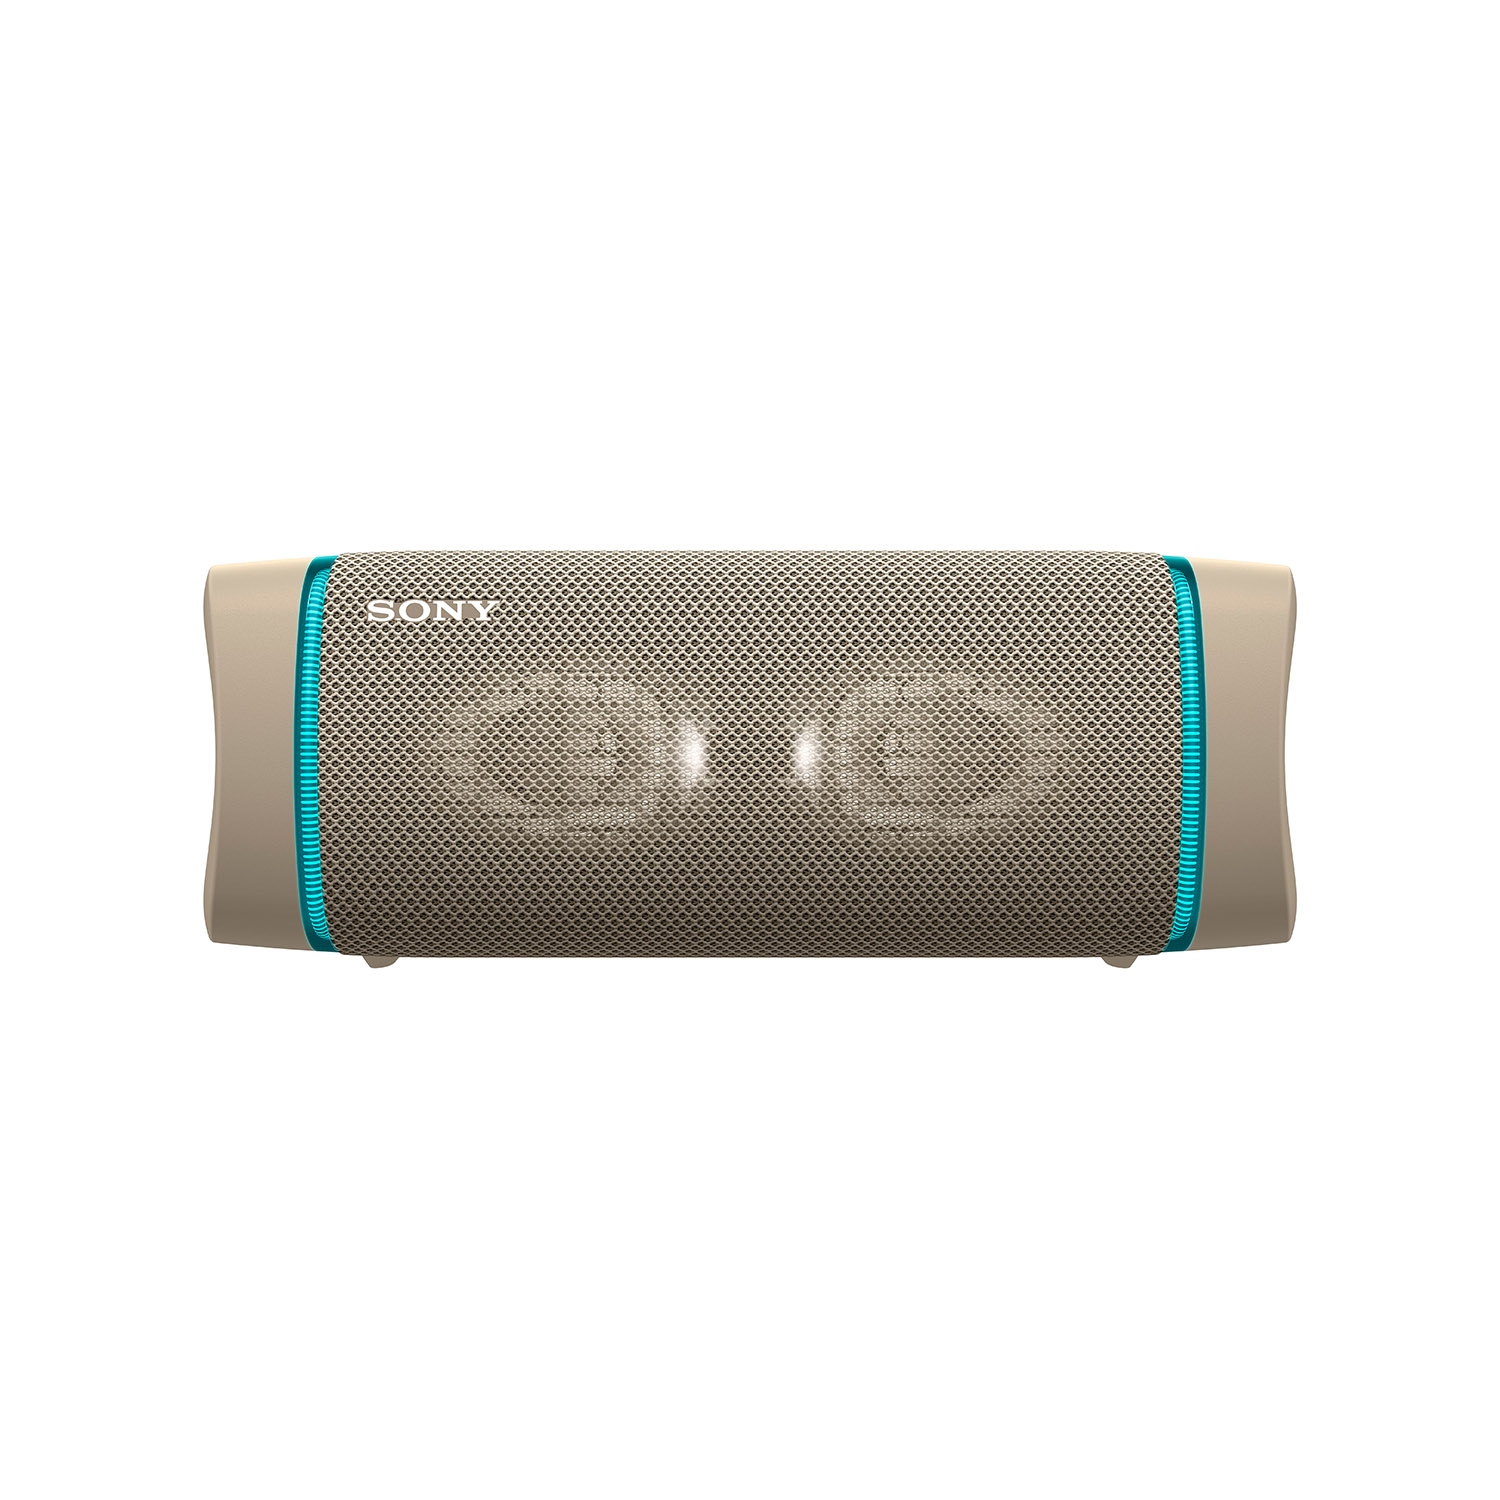 Sony SRSXB33CCE7 Portable Wireless Bluetooth Speaker - Taupe - 0